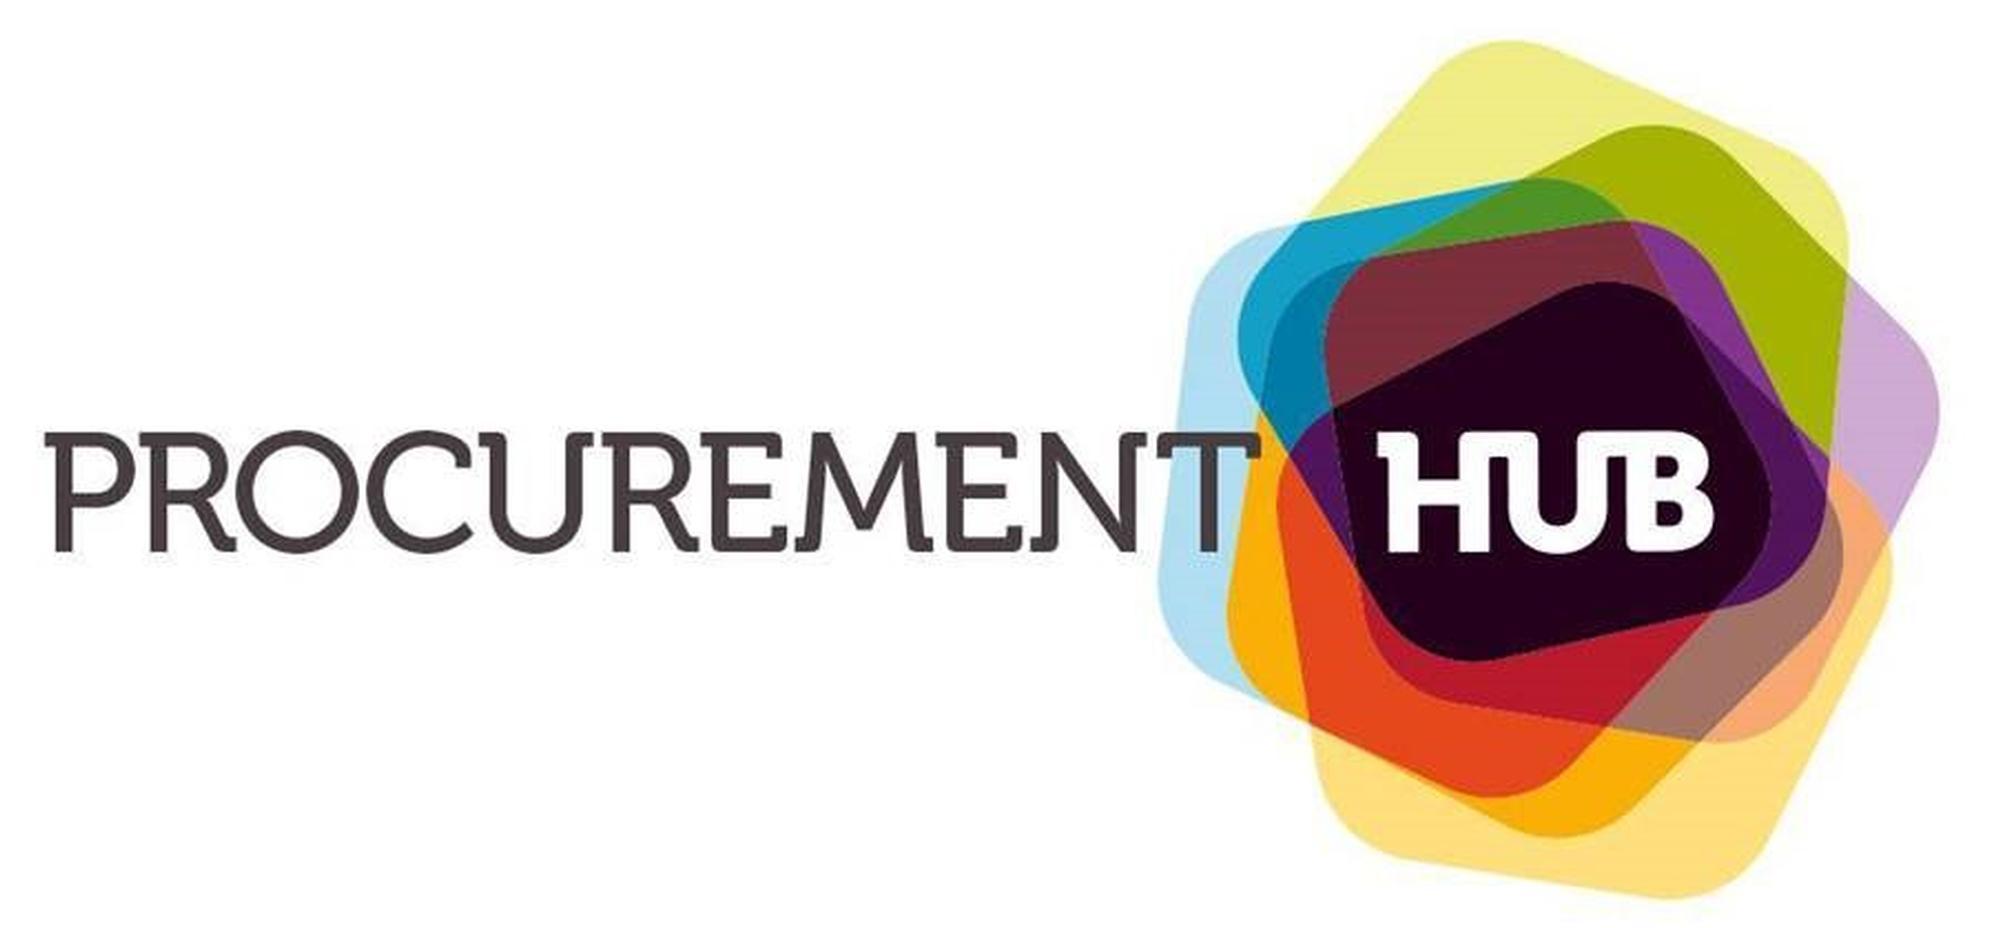 FRC awarded prestigious Procurement Hub contract as sole supplier on Furniture and Homeware framework